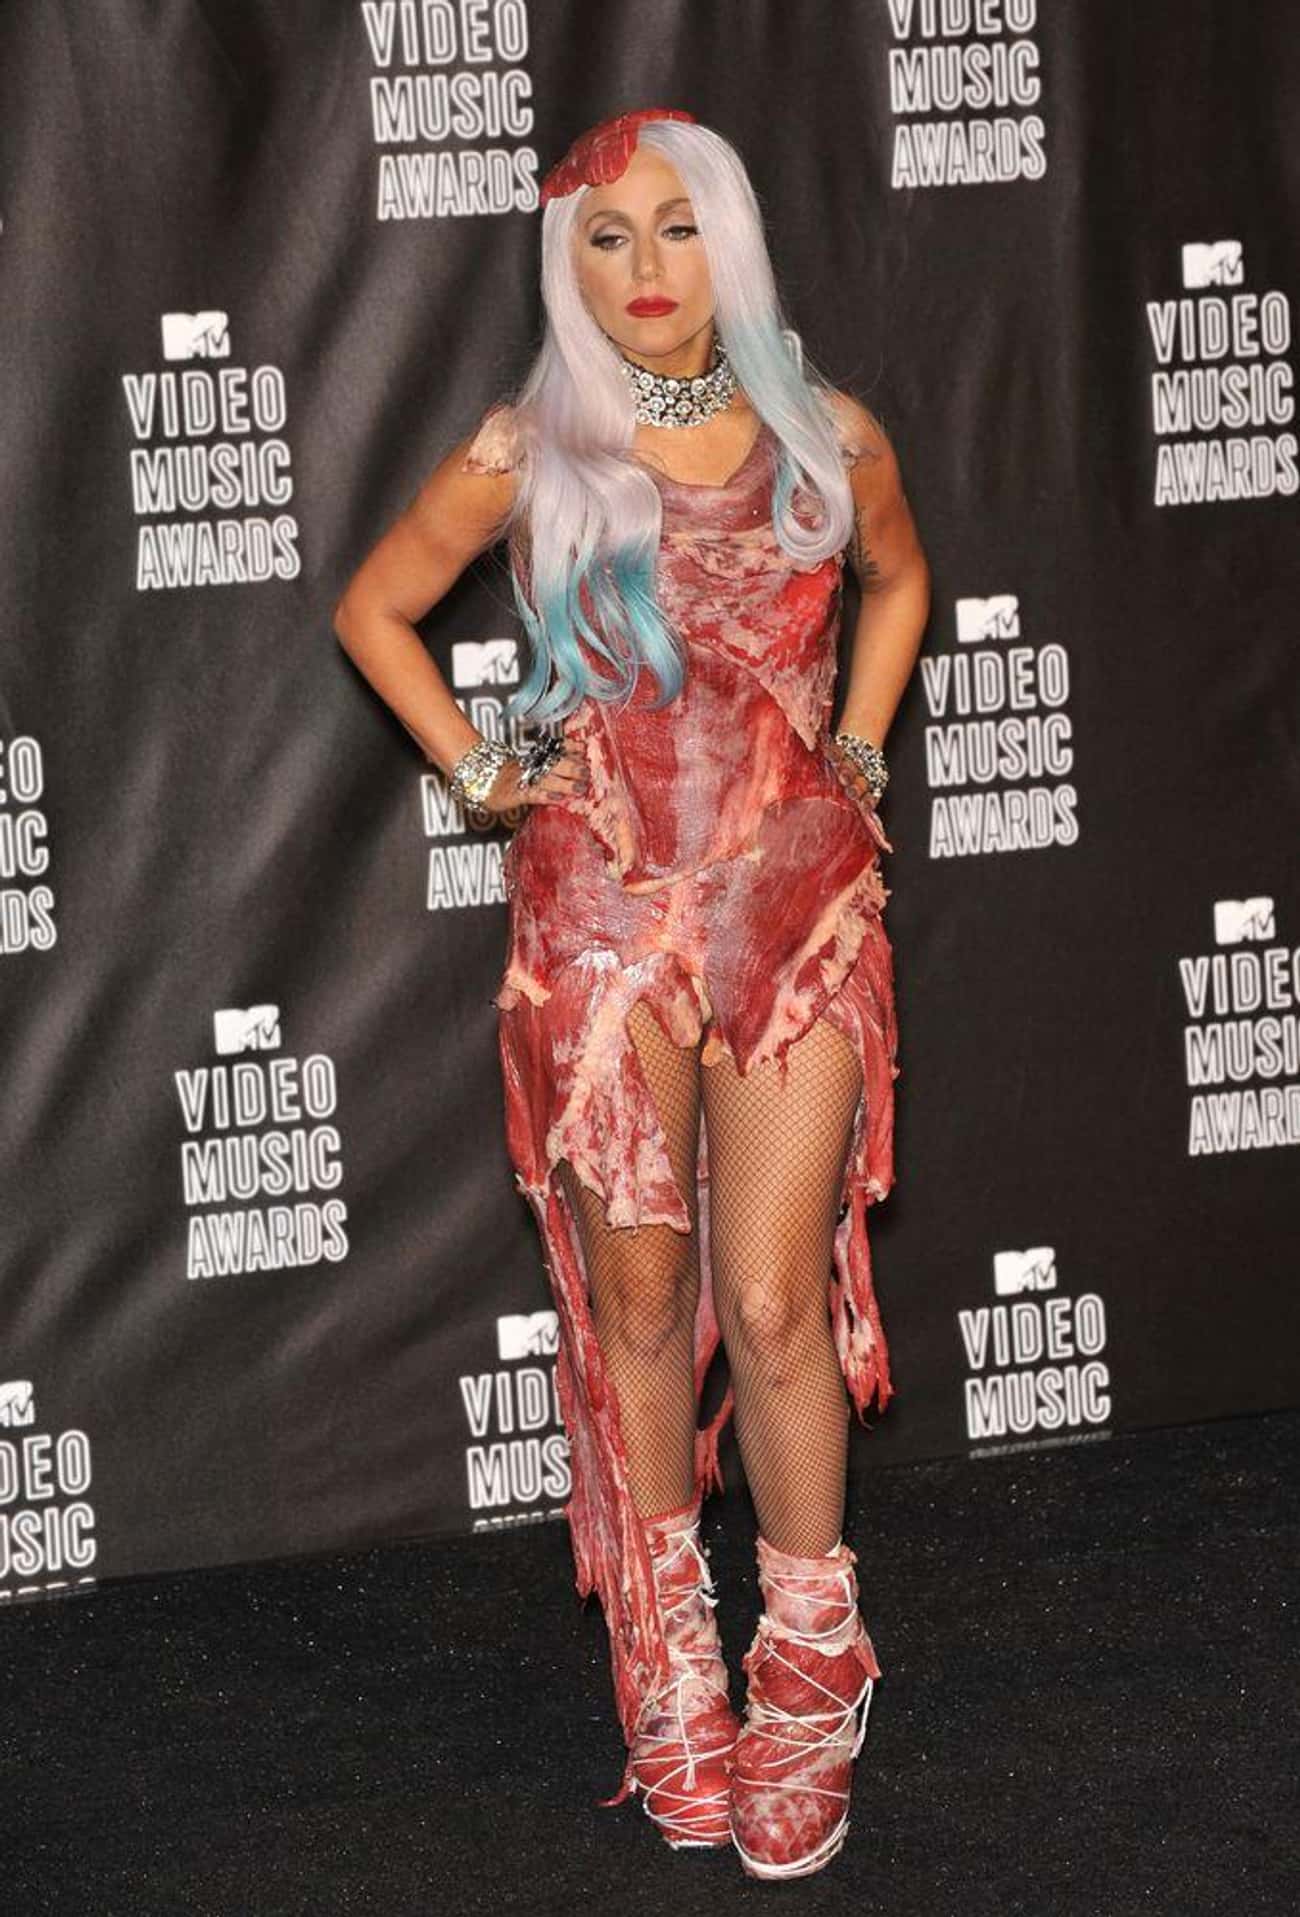 Her Meat Dress Was A Statement On "Don't Ask Don't Tell"